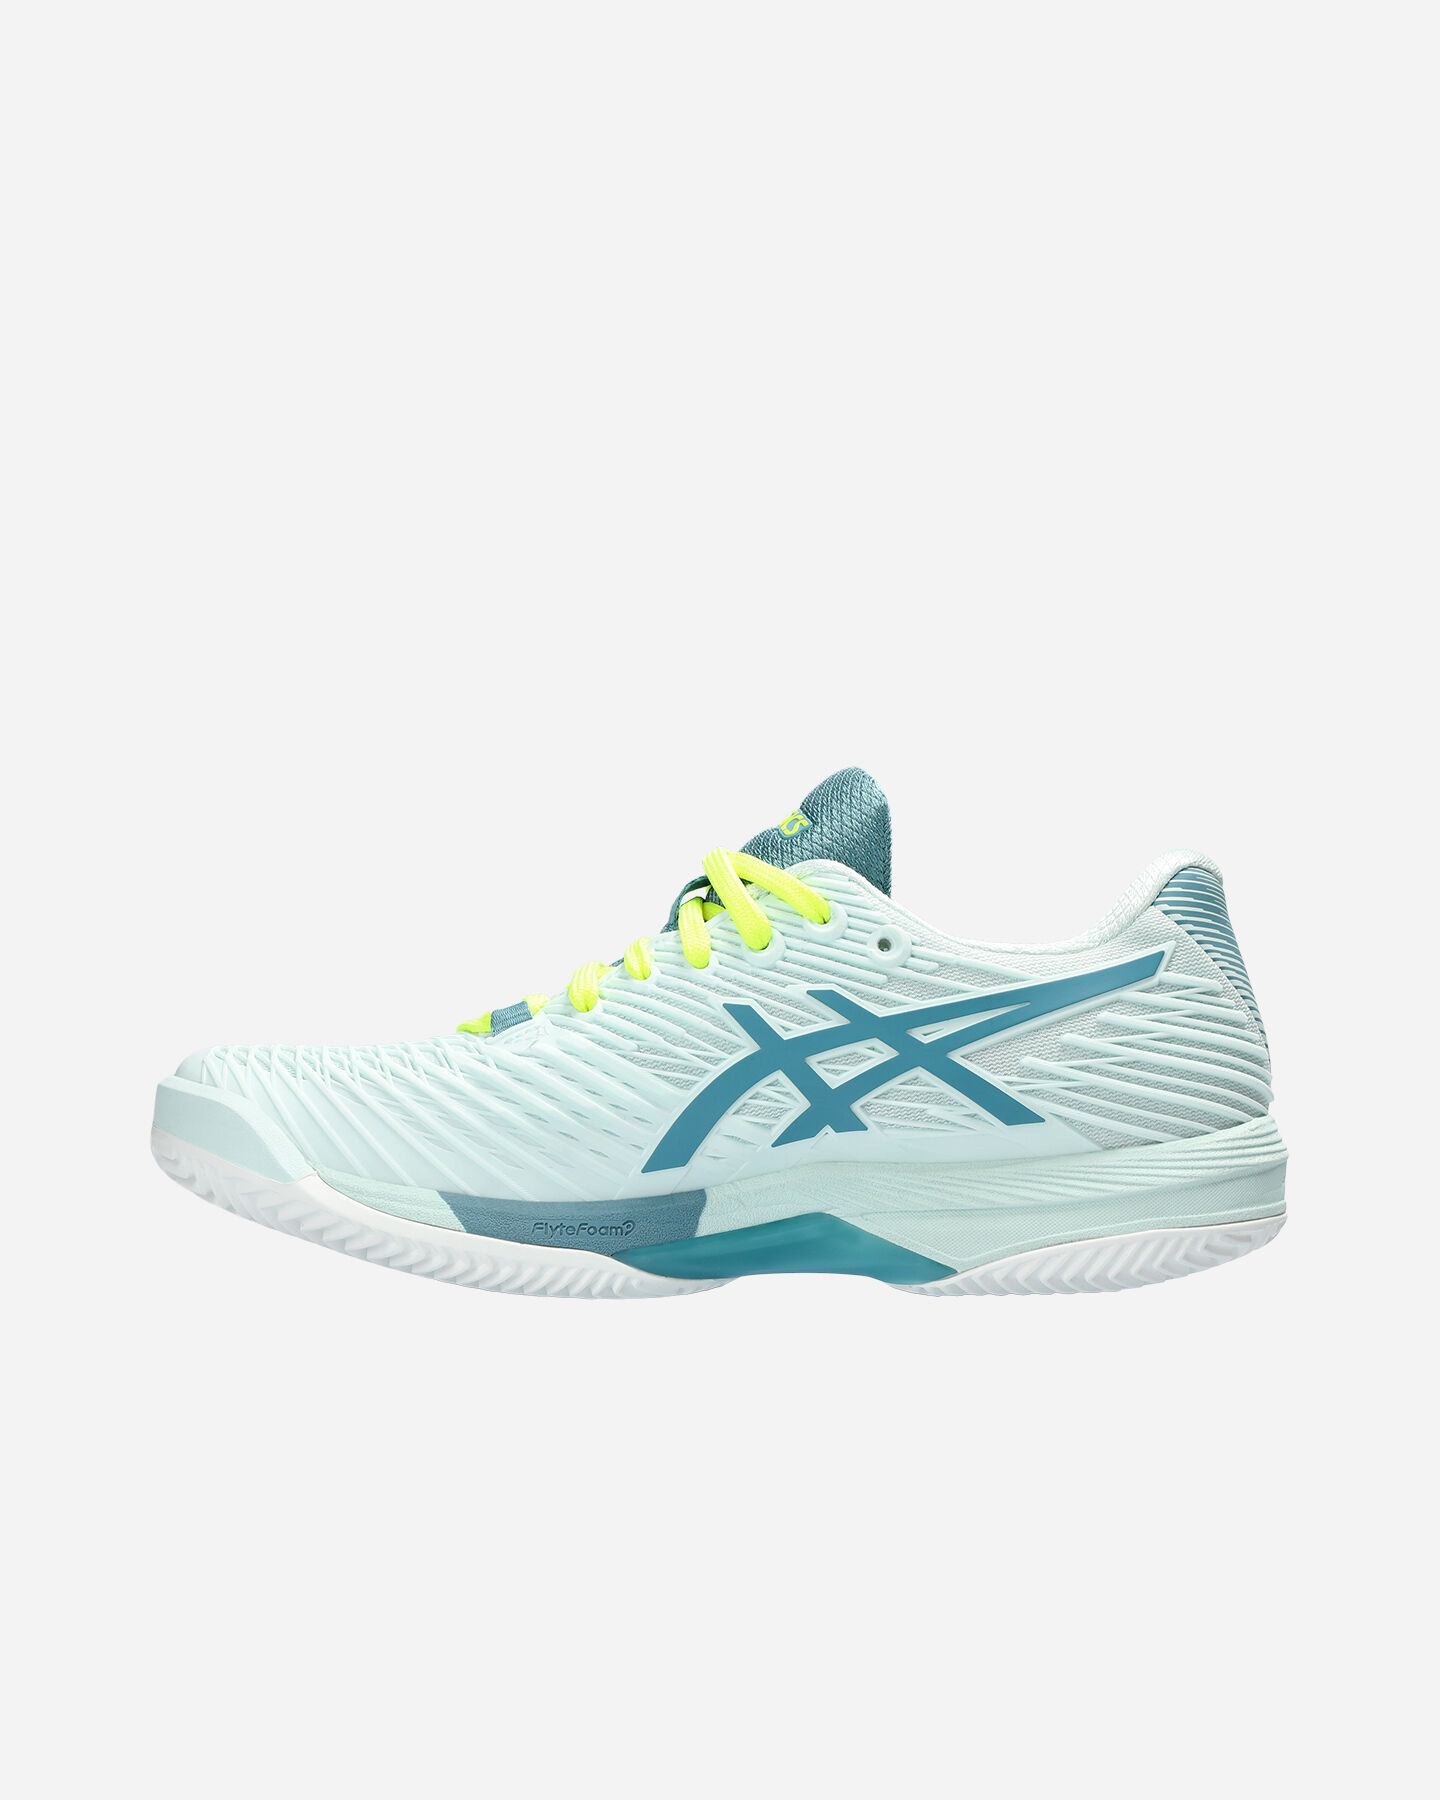  Scarpe tennis ASICS SOLUTION SPEED FF 2 CLAY W S5585315|405|6H scatto 5